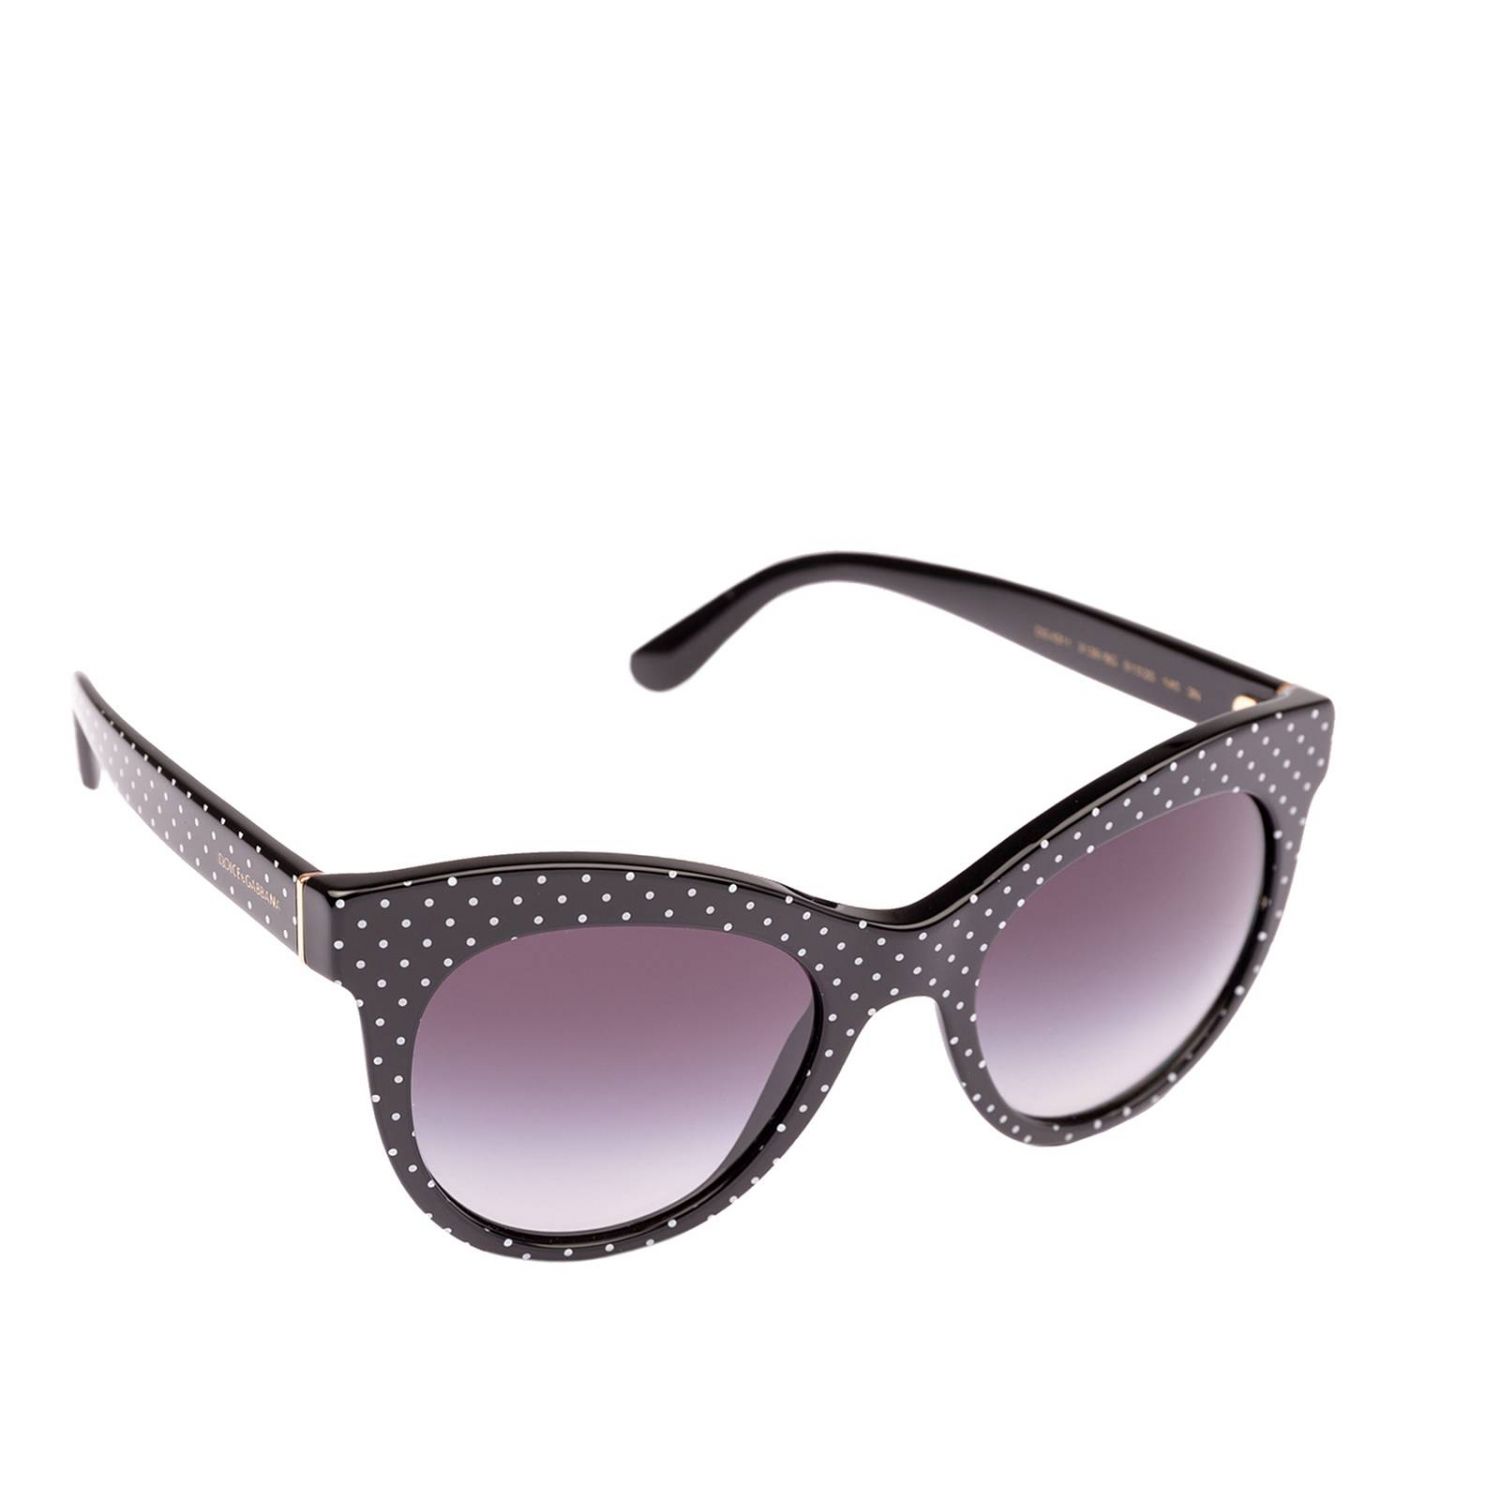 DOLCE & GABBANA: sunglasses for woman - Black | Dolce & Gabbana sunglasses  DG4311 online on 